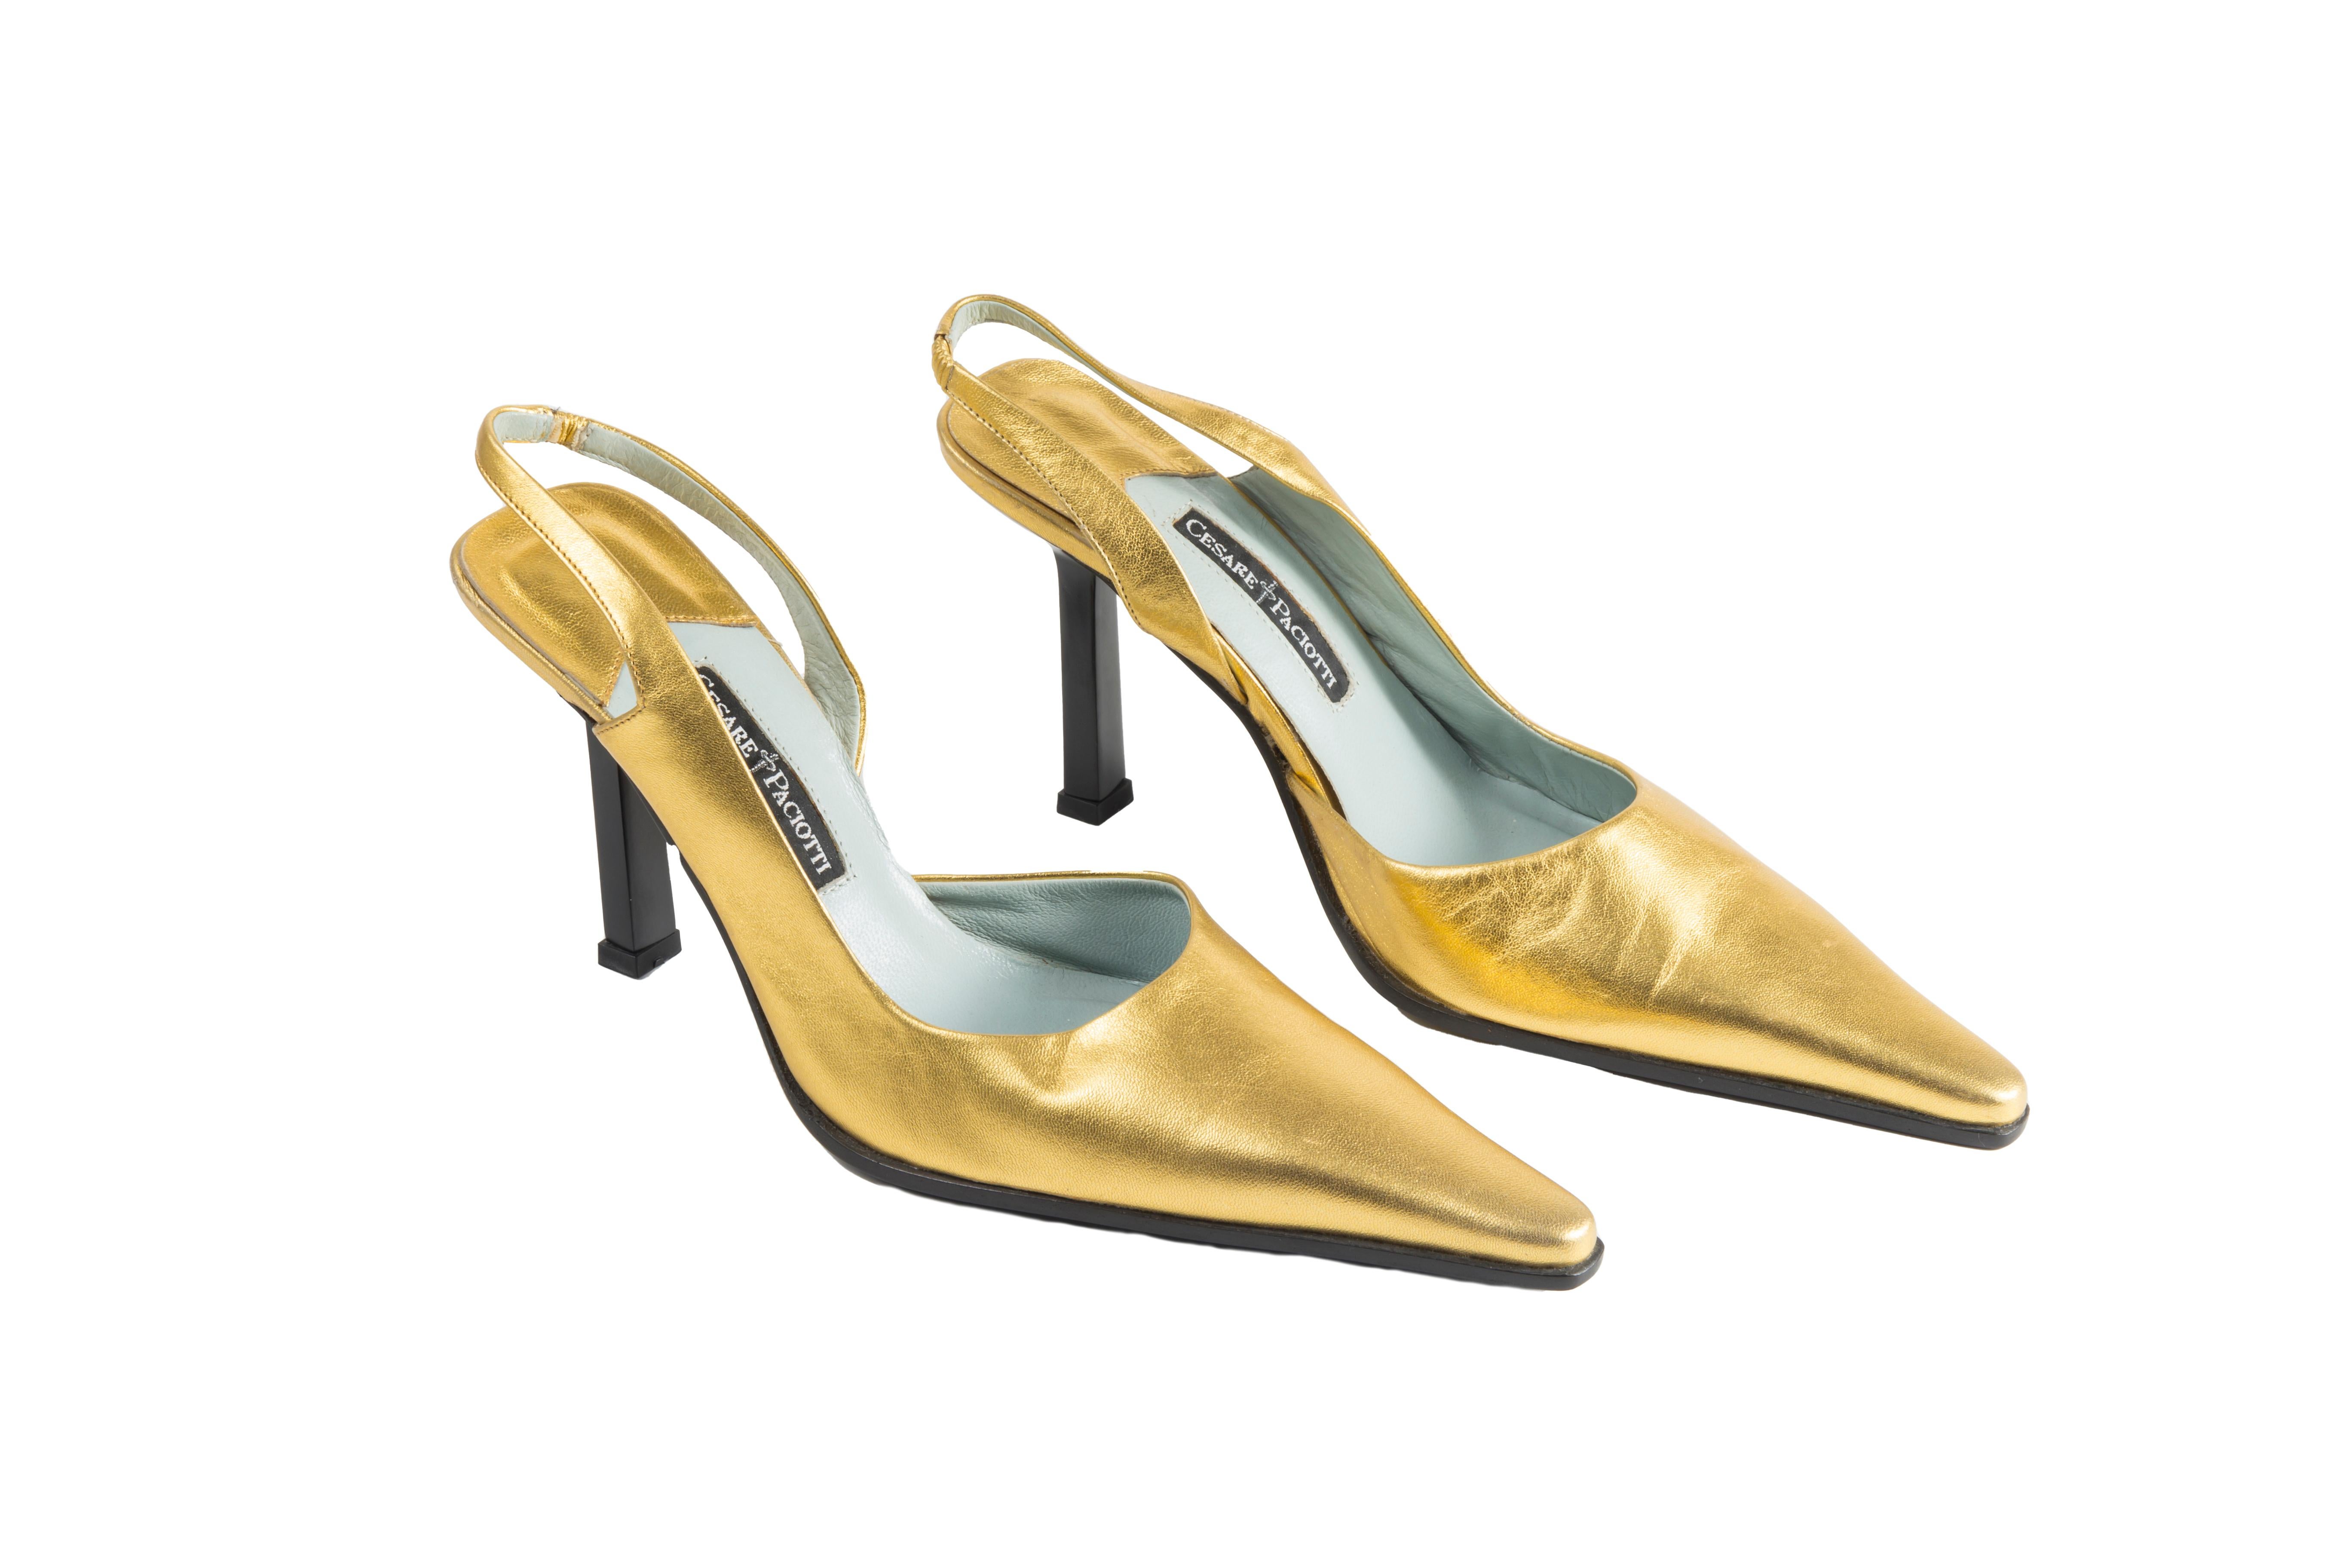 - Cesare Paciotti golden slingbacks
- Sold by Gold Palms Vintage
- Early 2000s
- Gold metallic leather pumps
- Pointed toe
- Black square heel